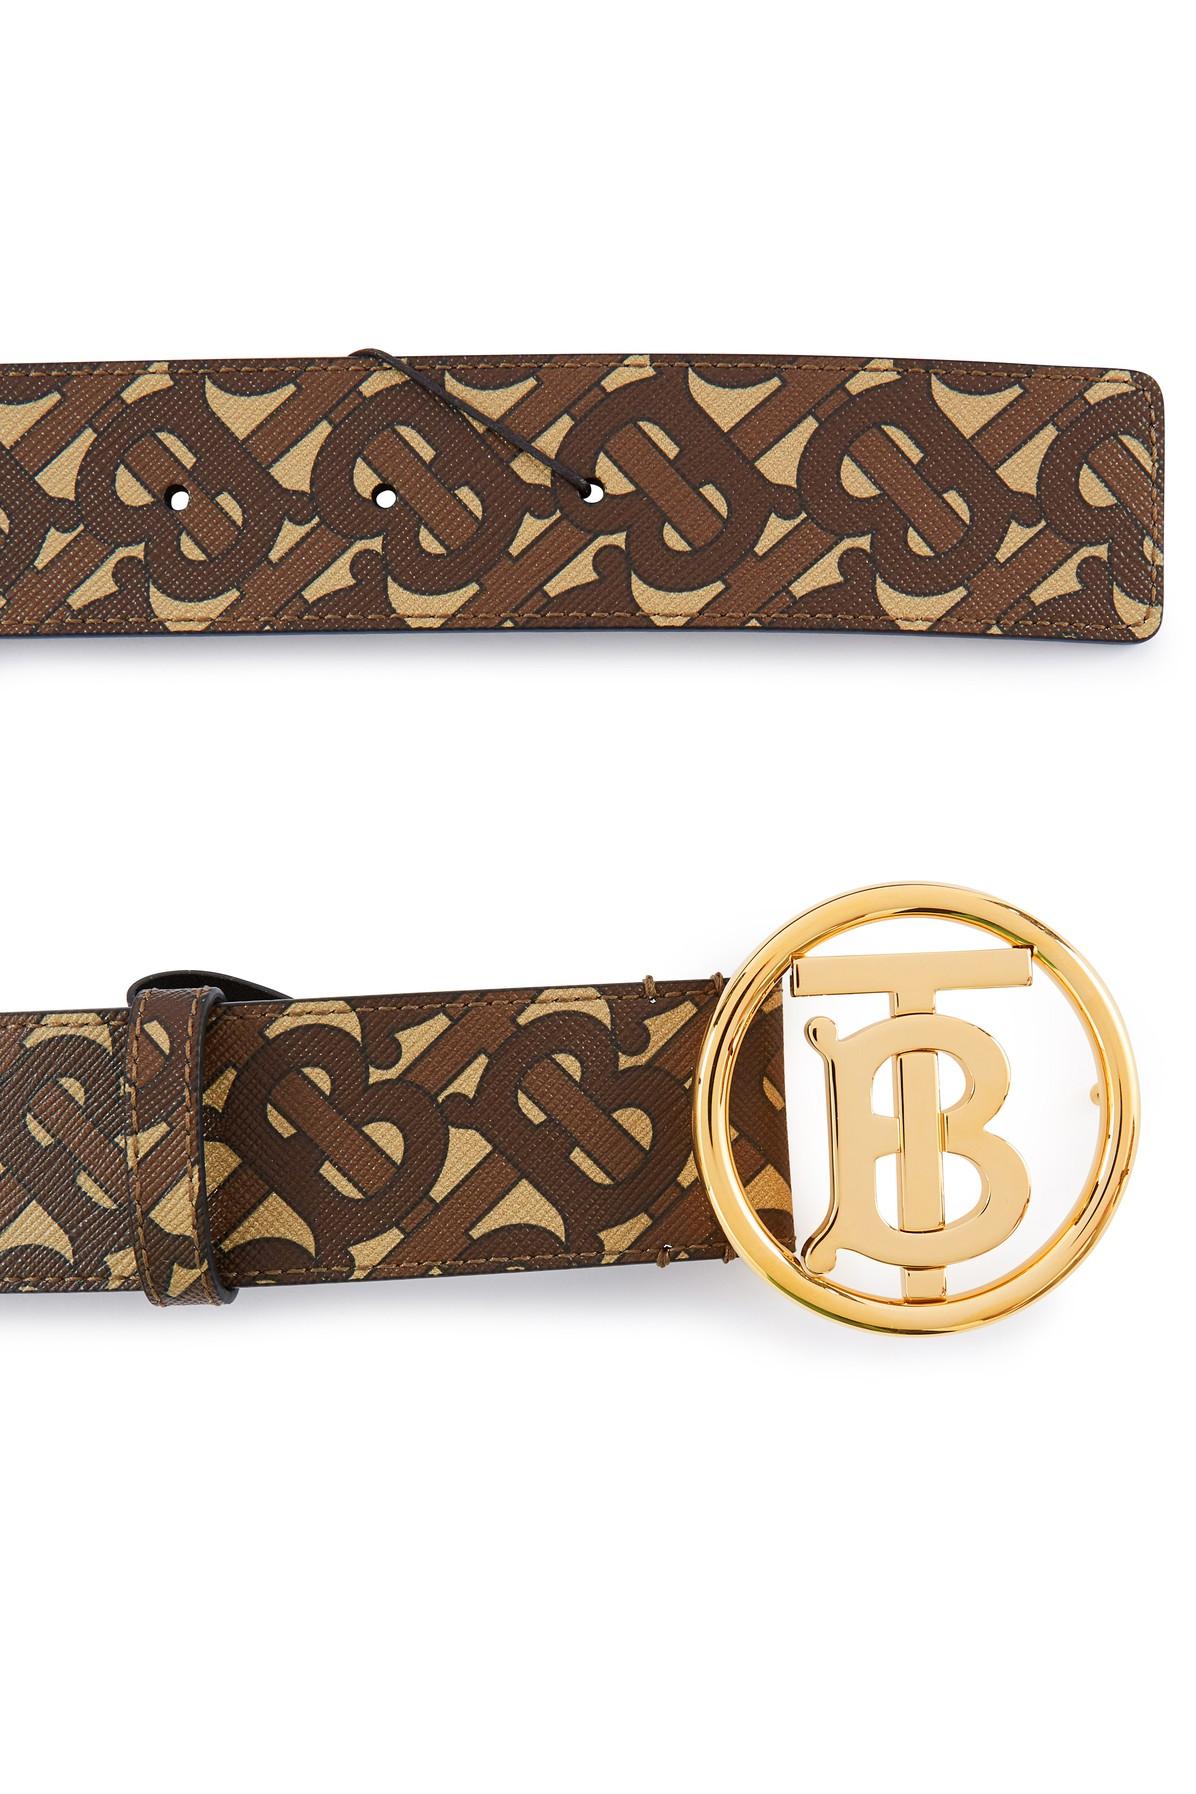 Burberry Tb Circle Belt in Bridle Brown (Brown) - Lyst